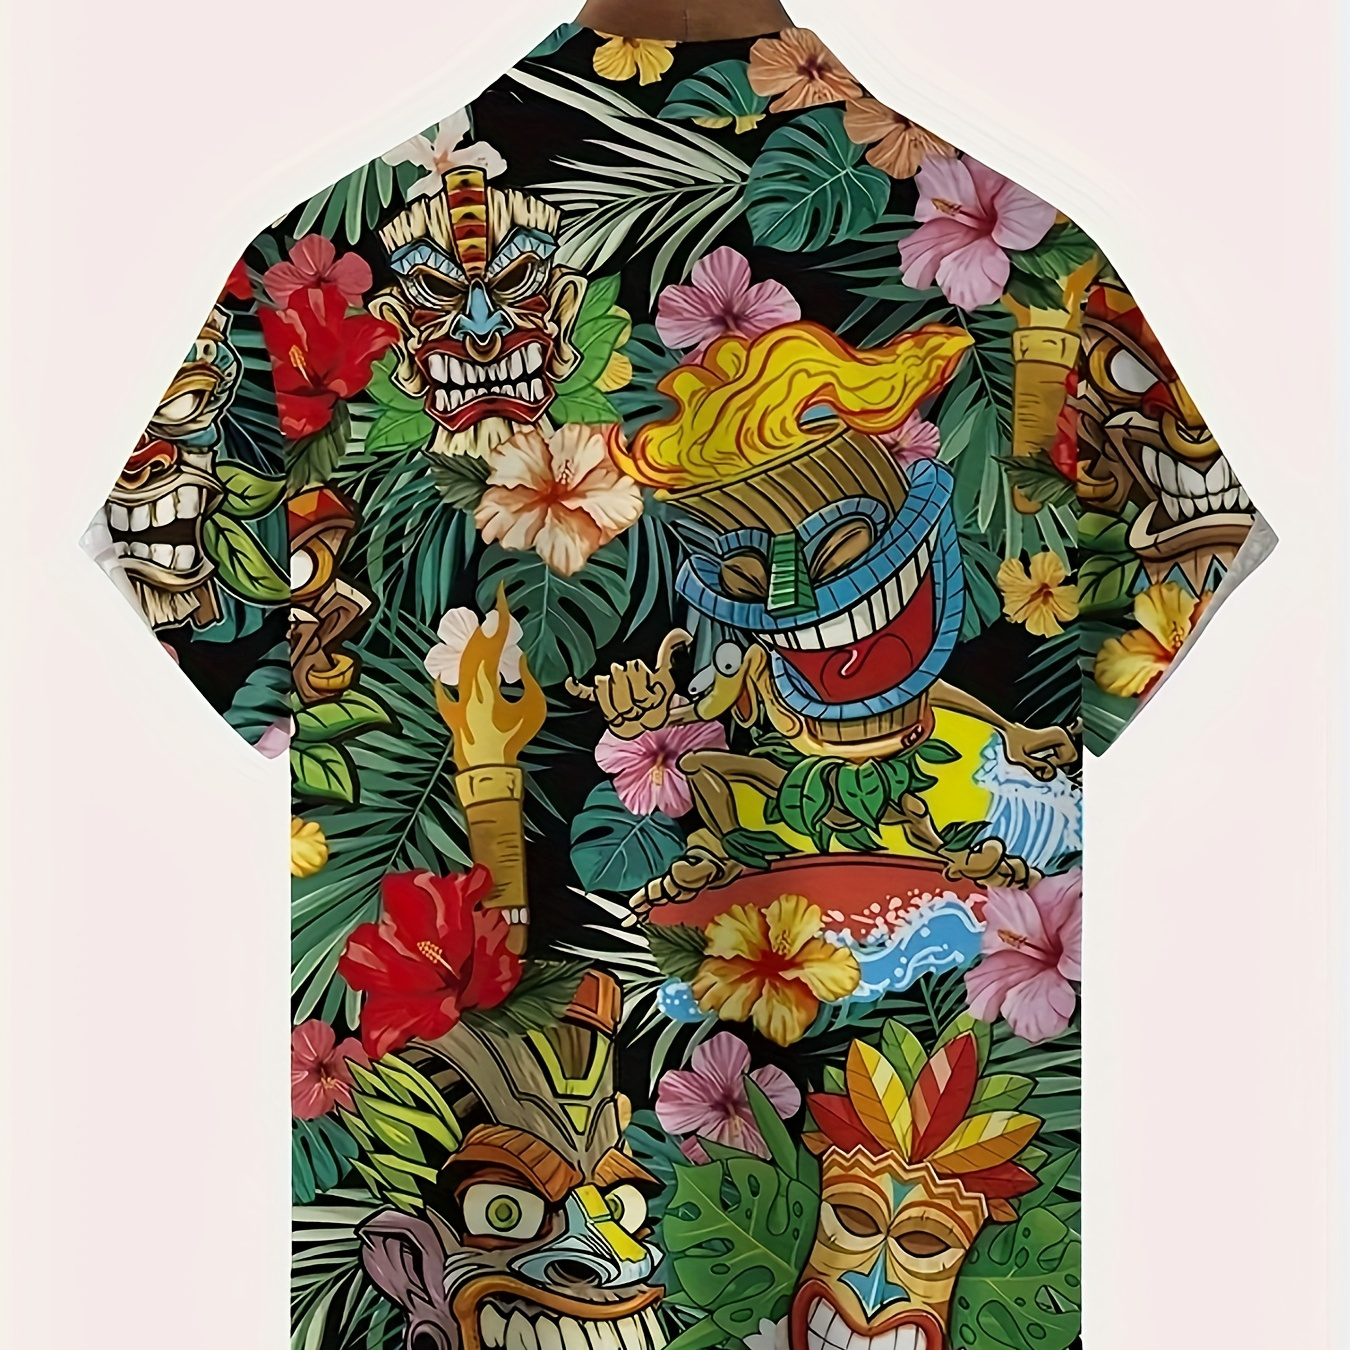 

Men's Trendy Hawaiian Lapel Collar Graphic Shirt With Stylish Vibrant Print For Summer Vacation And Casual Wear